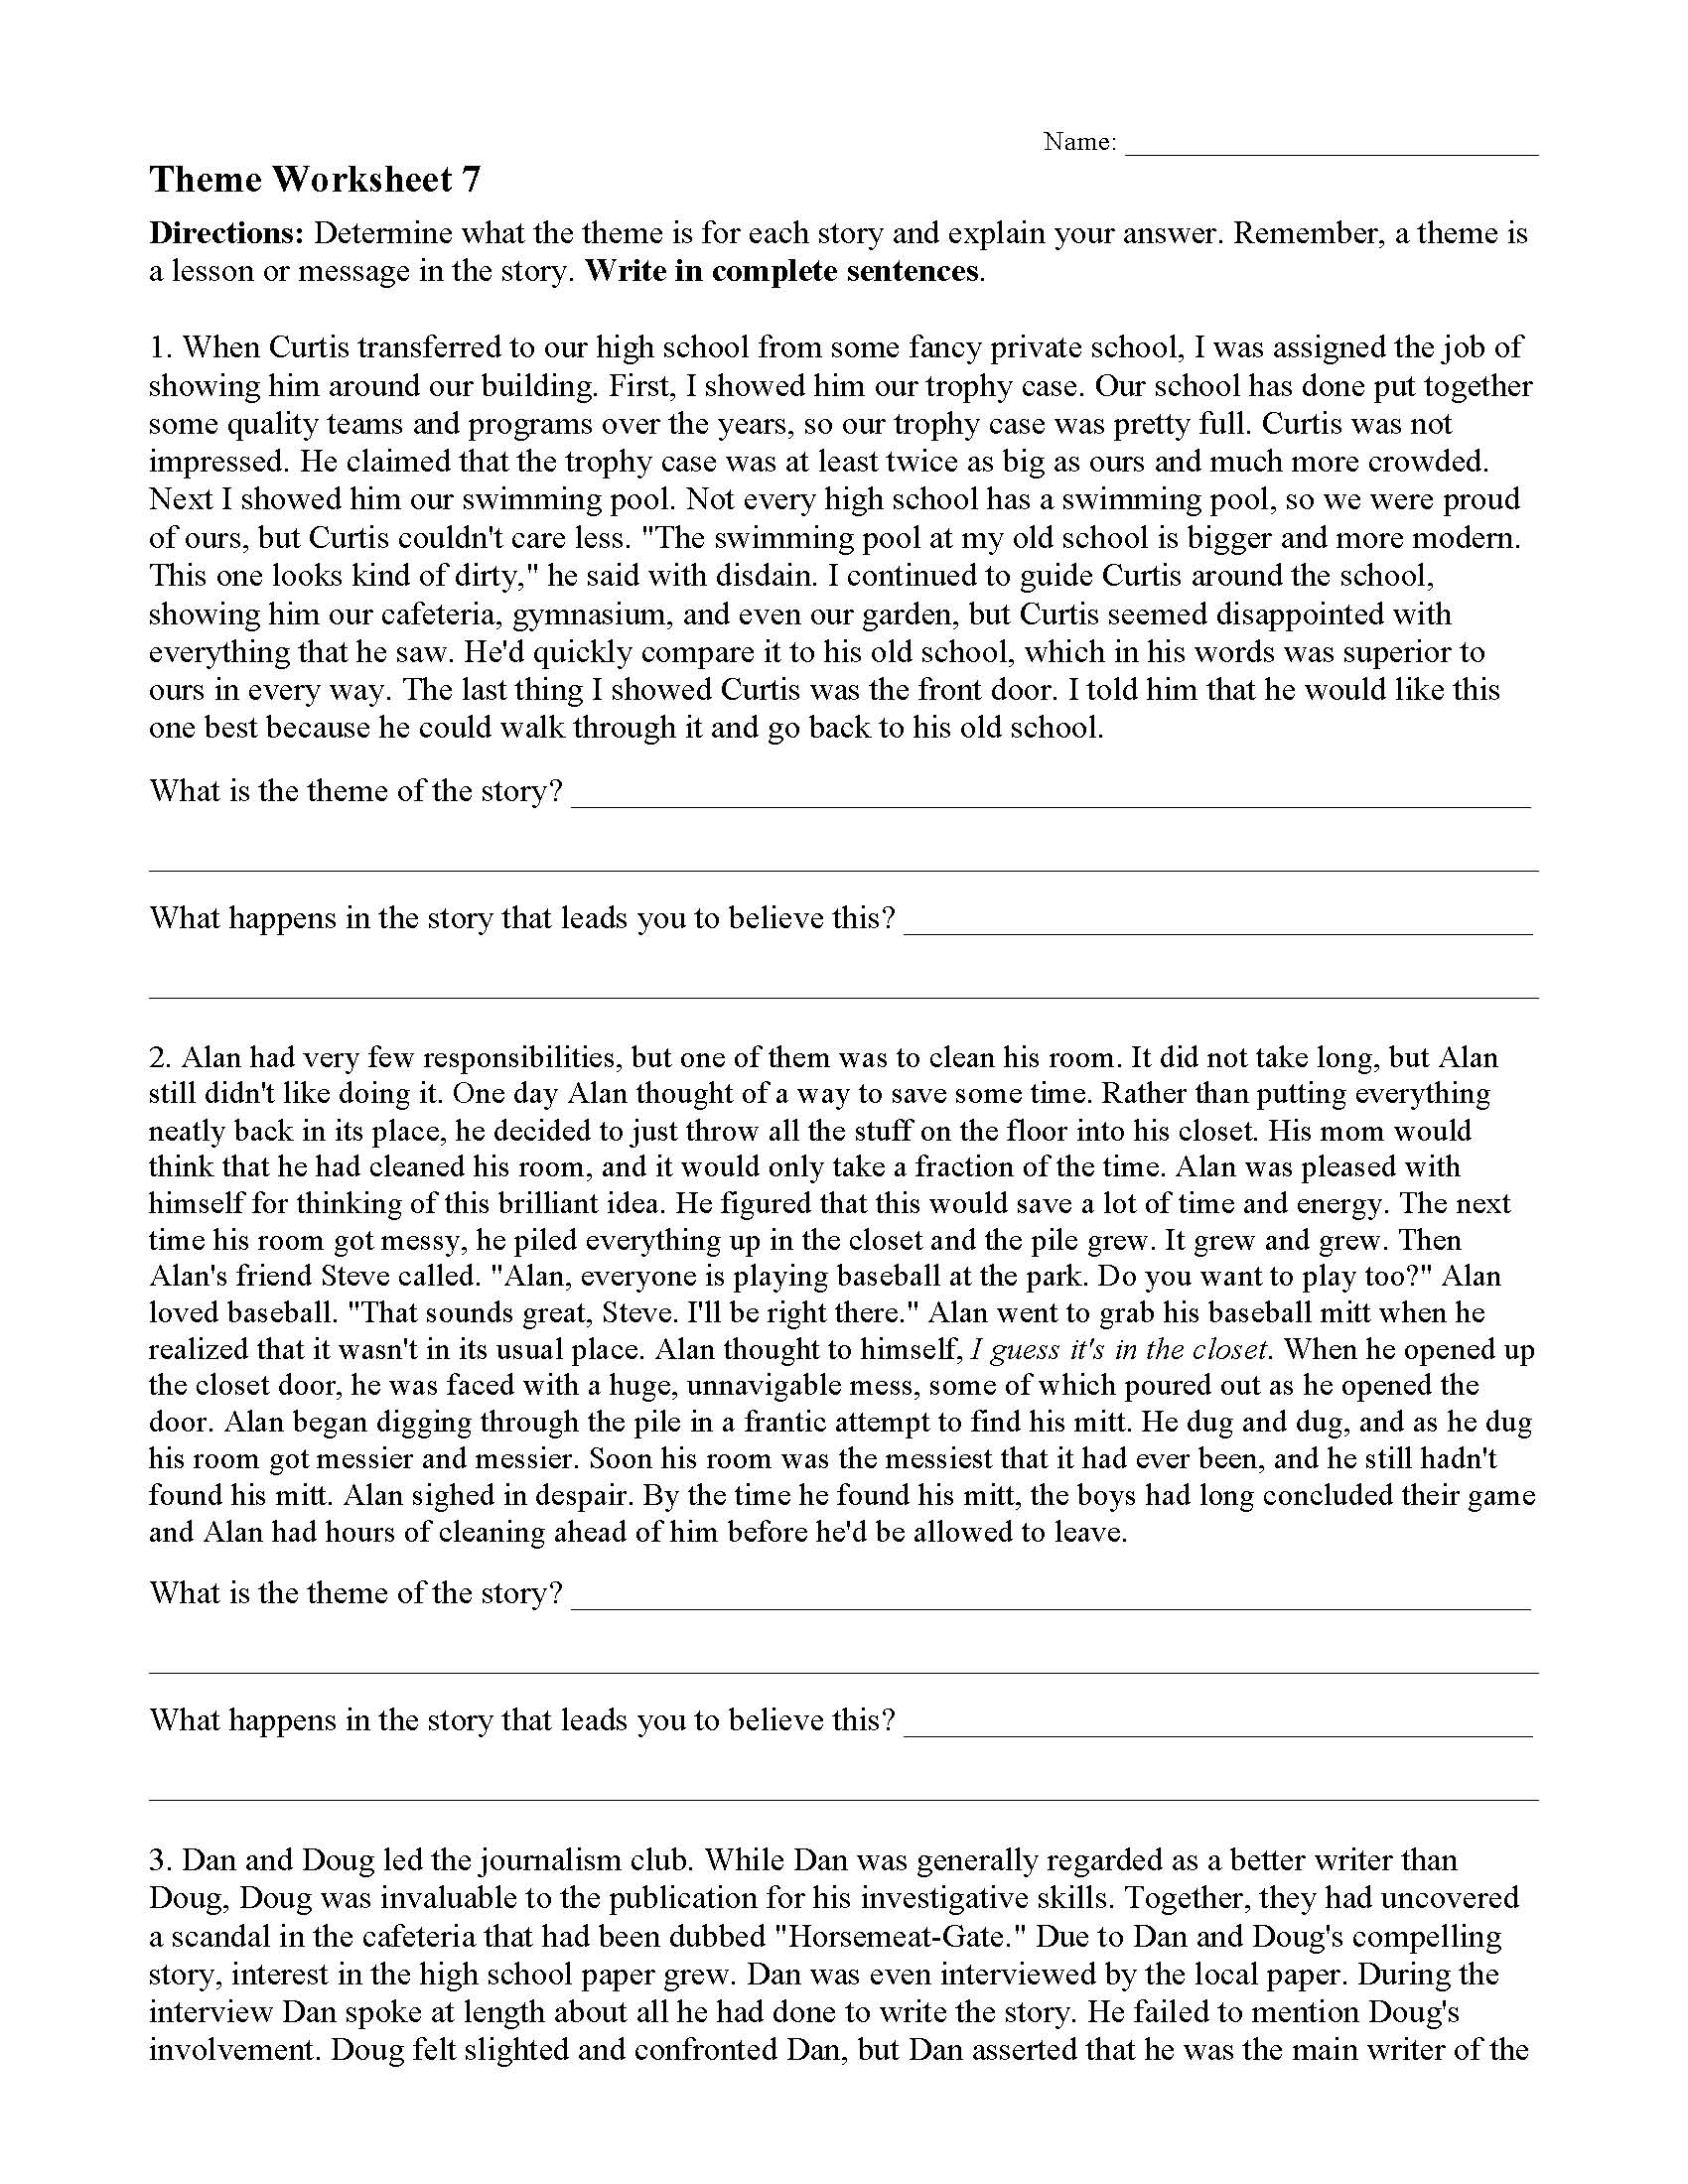 Theme Or Author S Message Worksheets Ereading Worksheets